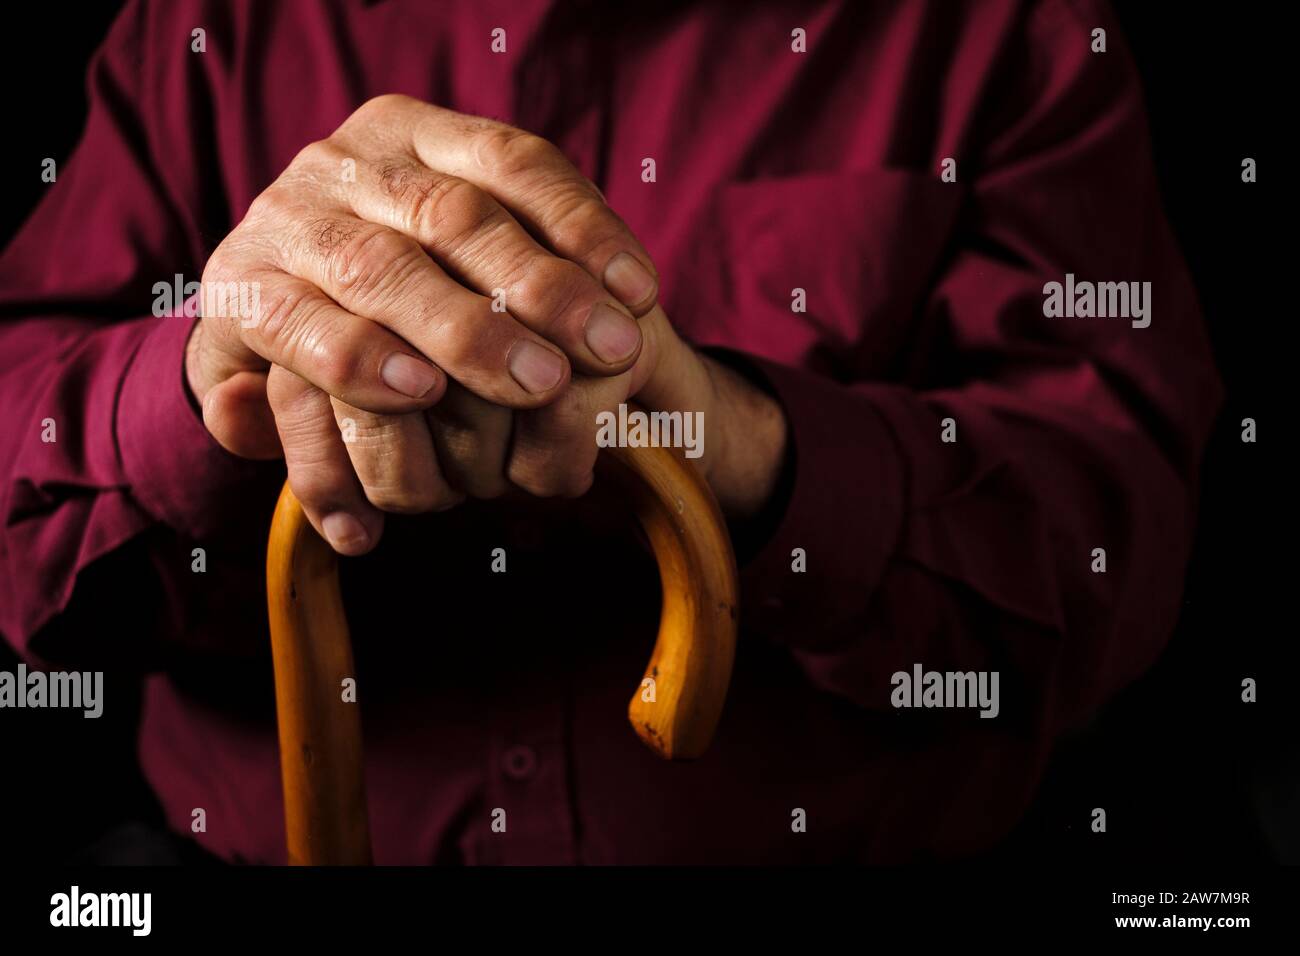 Elderly man resting his hands on his walking cane Stock Photo